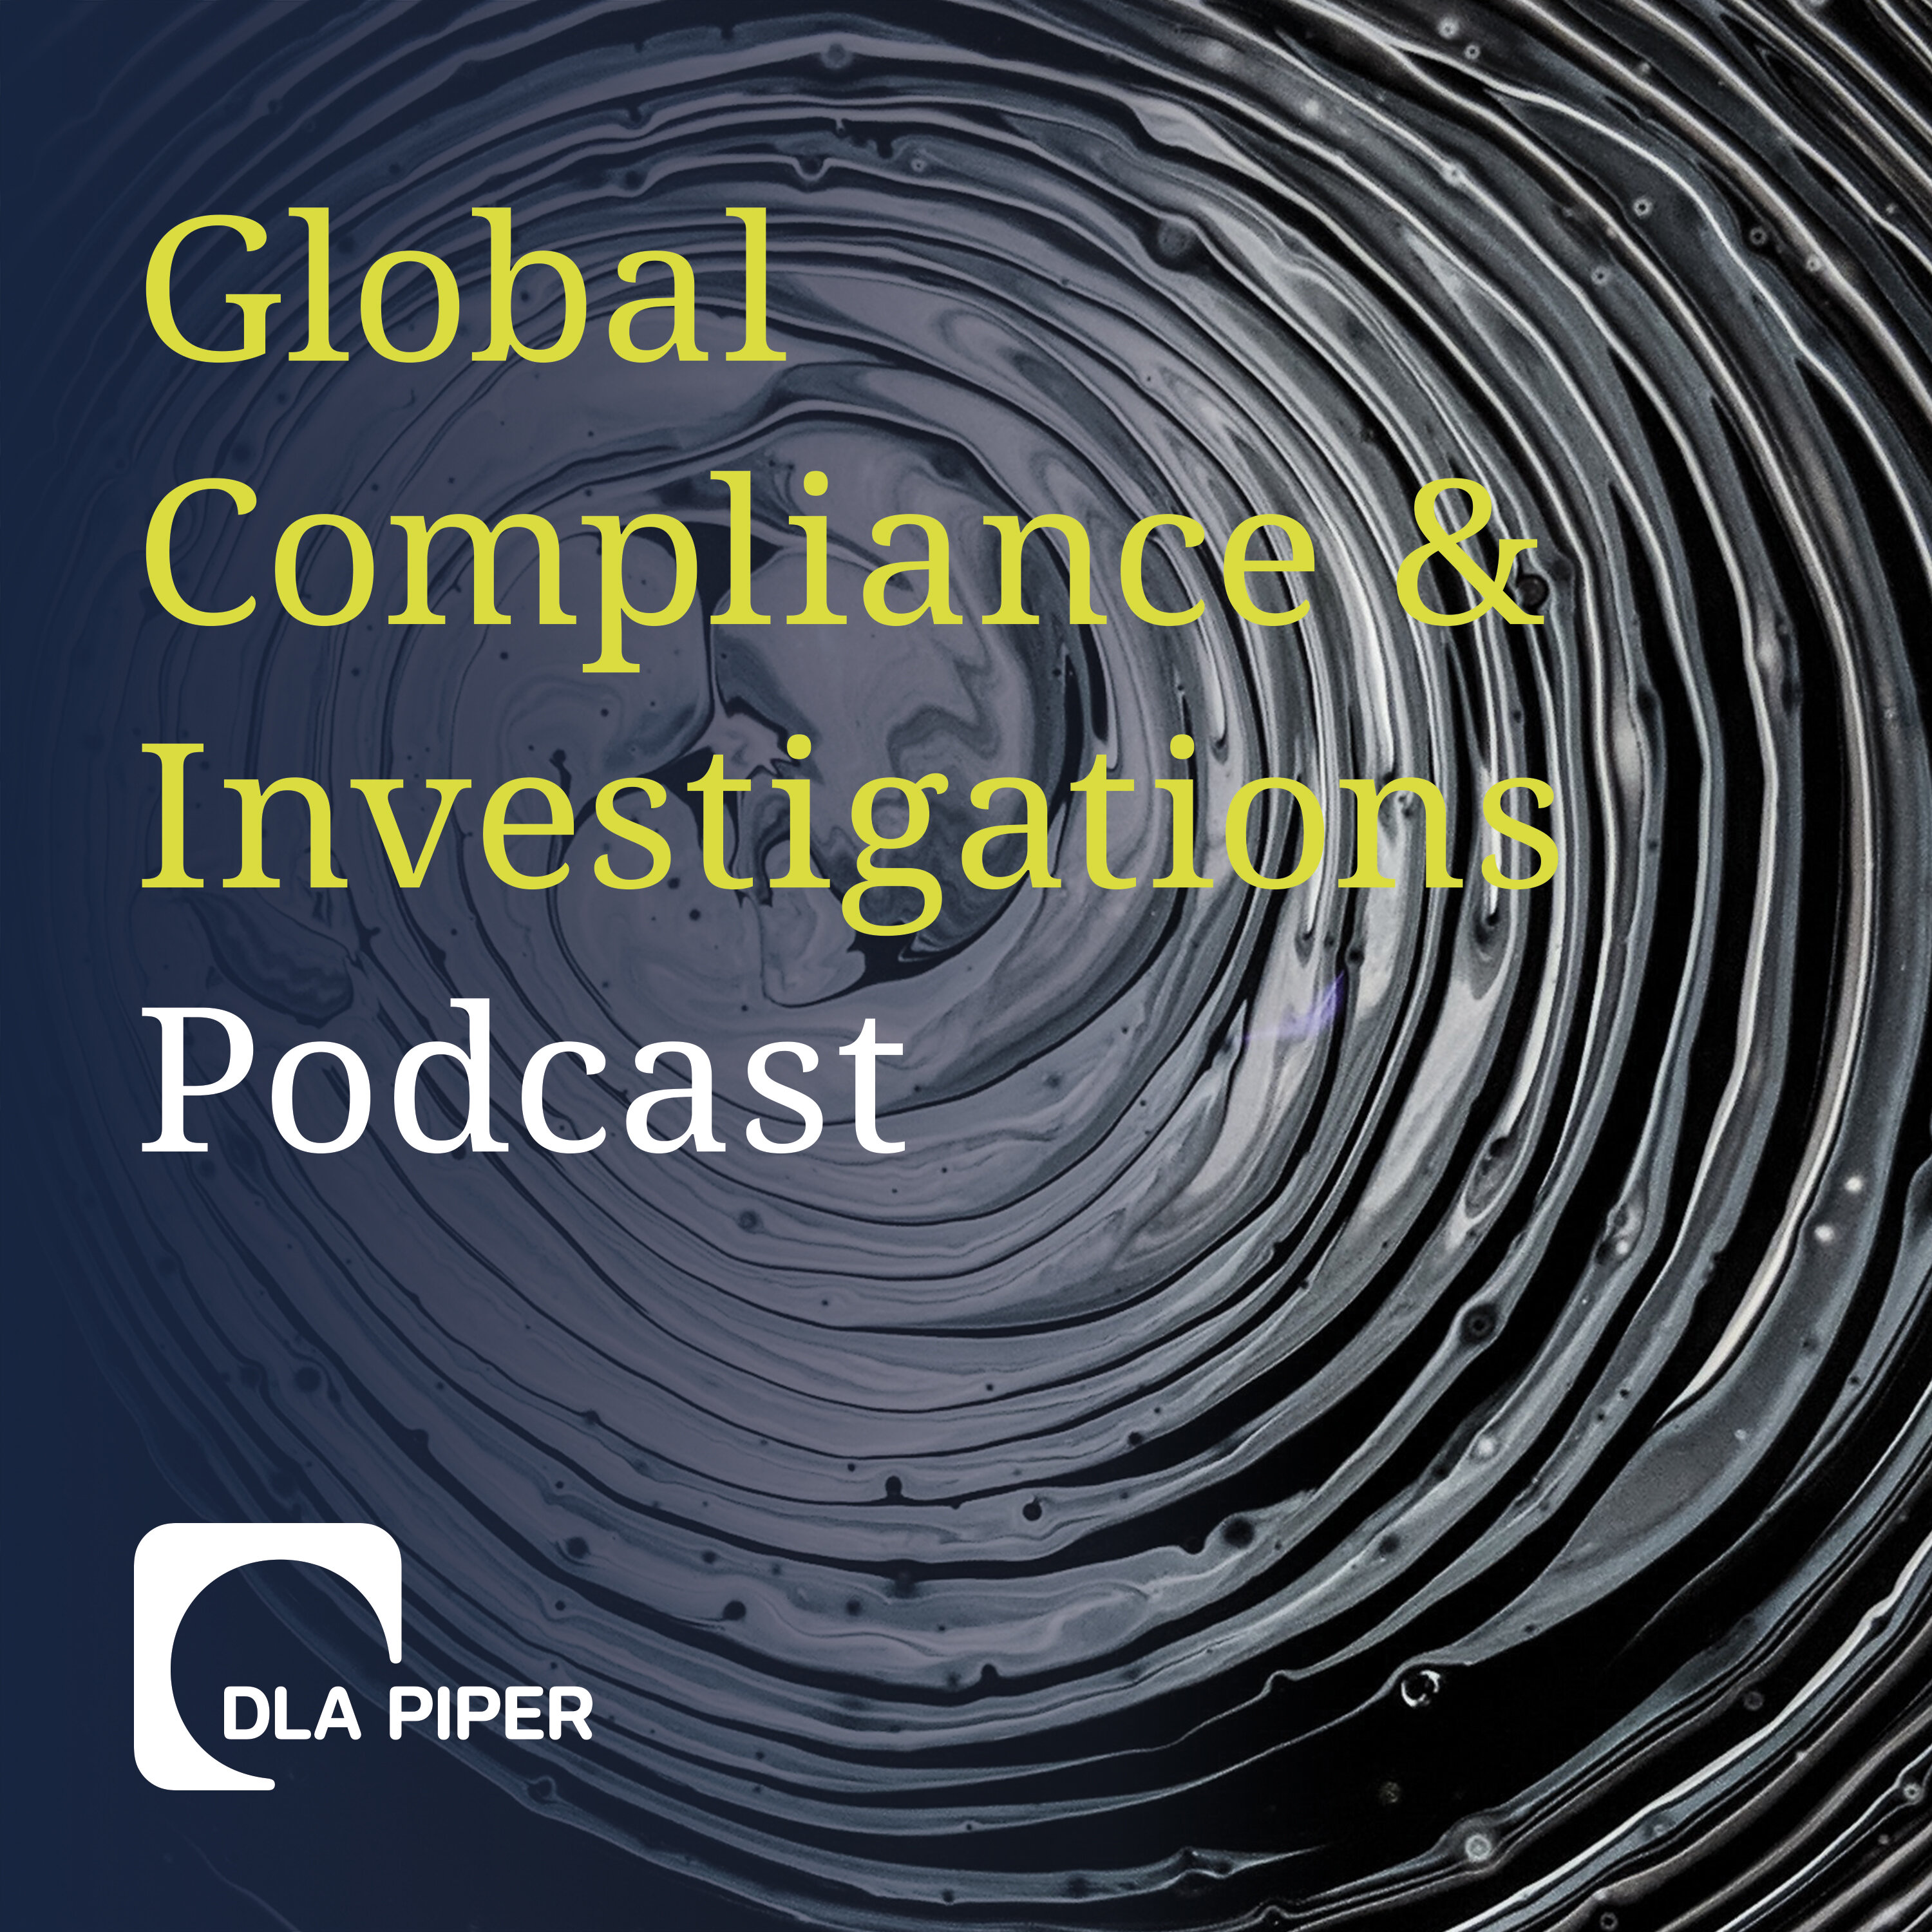 Global Compliance & Investigations Podcast Trailer